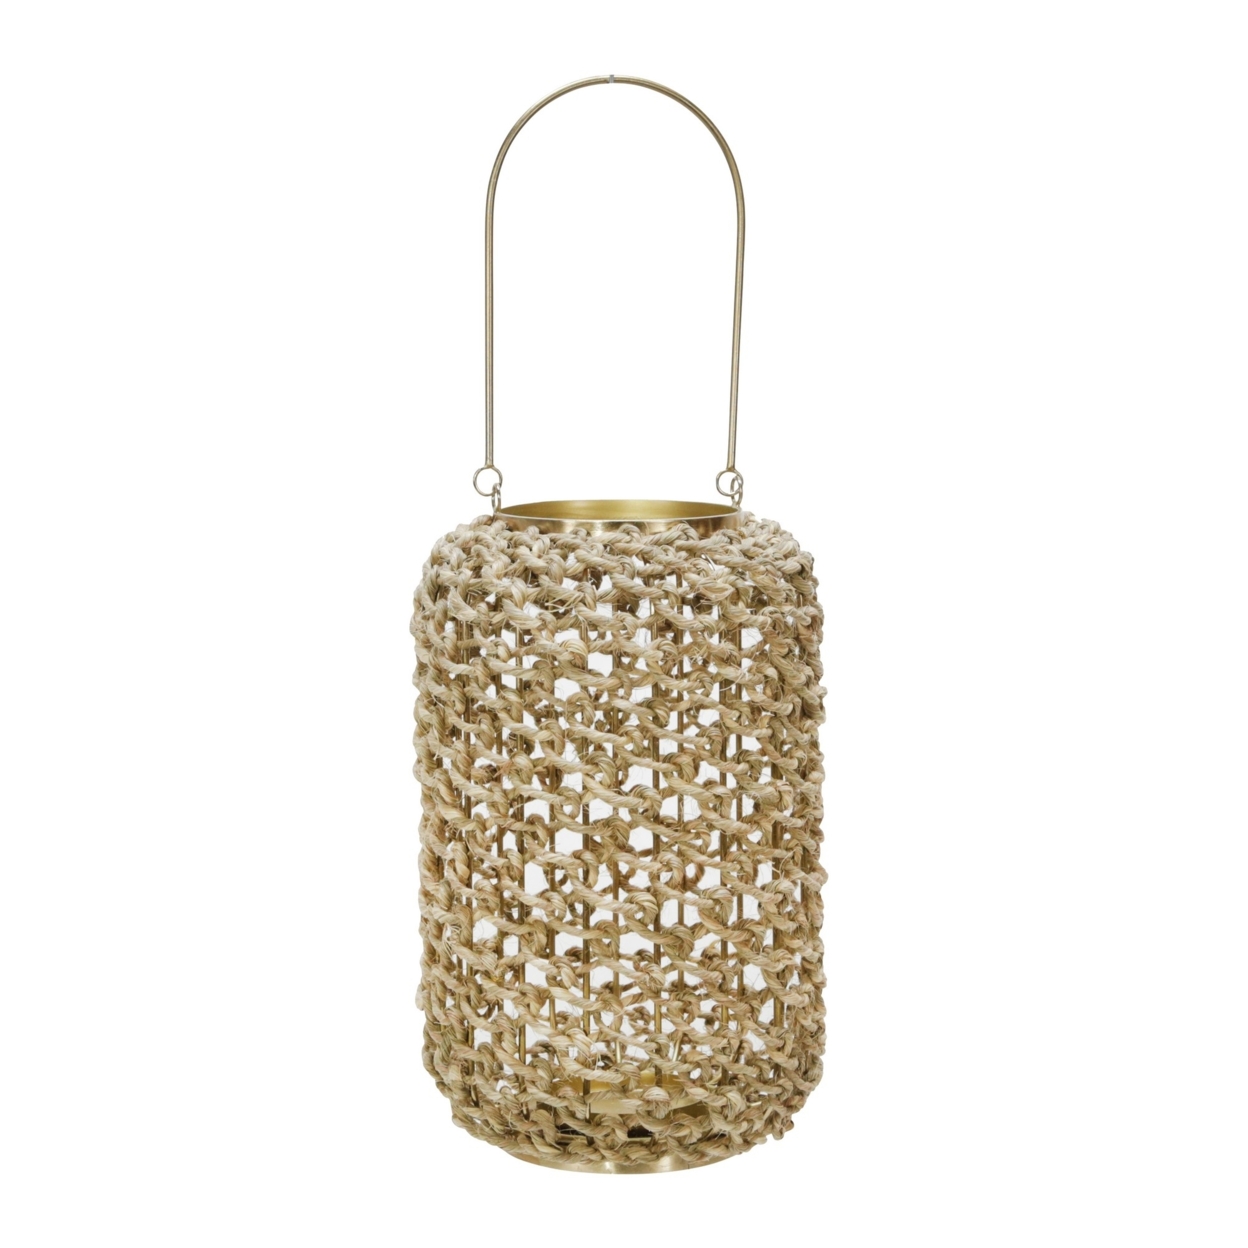 Cylindrical Rattan Lantern With Metal Frame And Handle,Large,Brown And Gold- Saltoro Sherpi